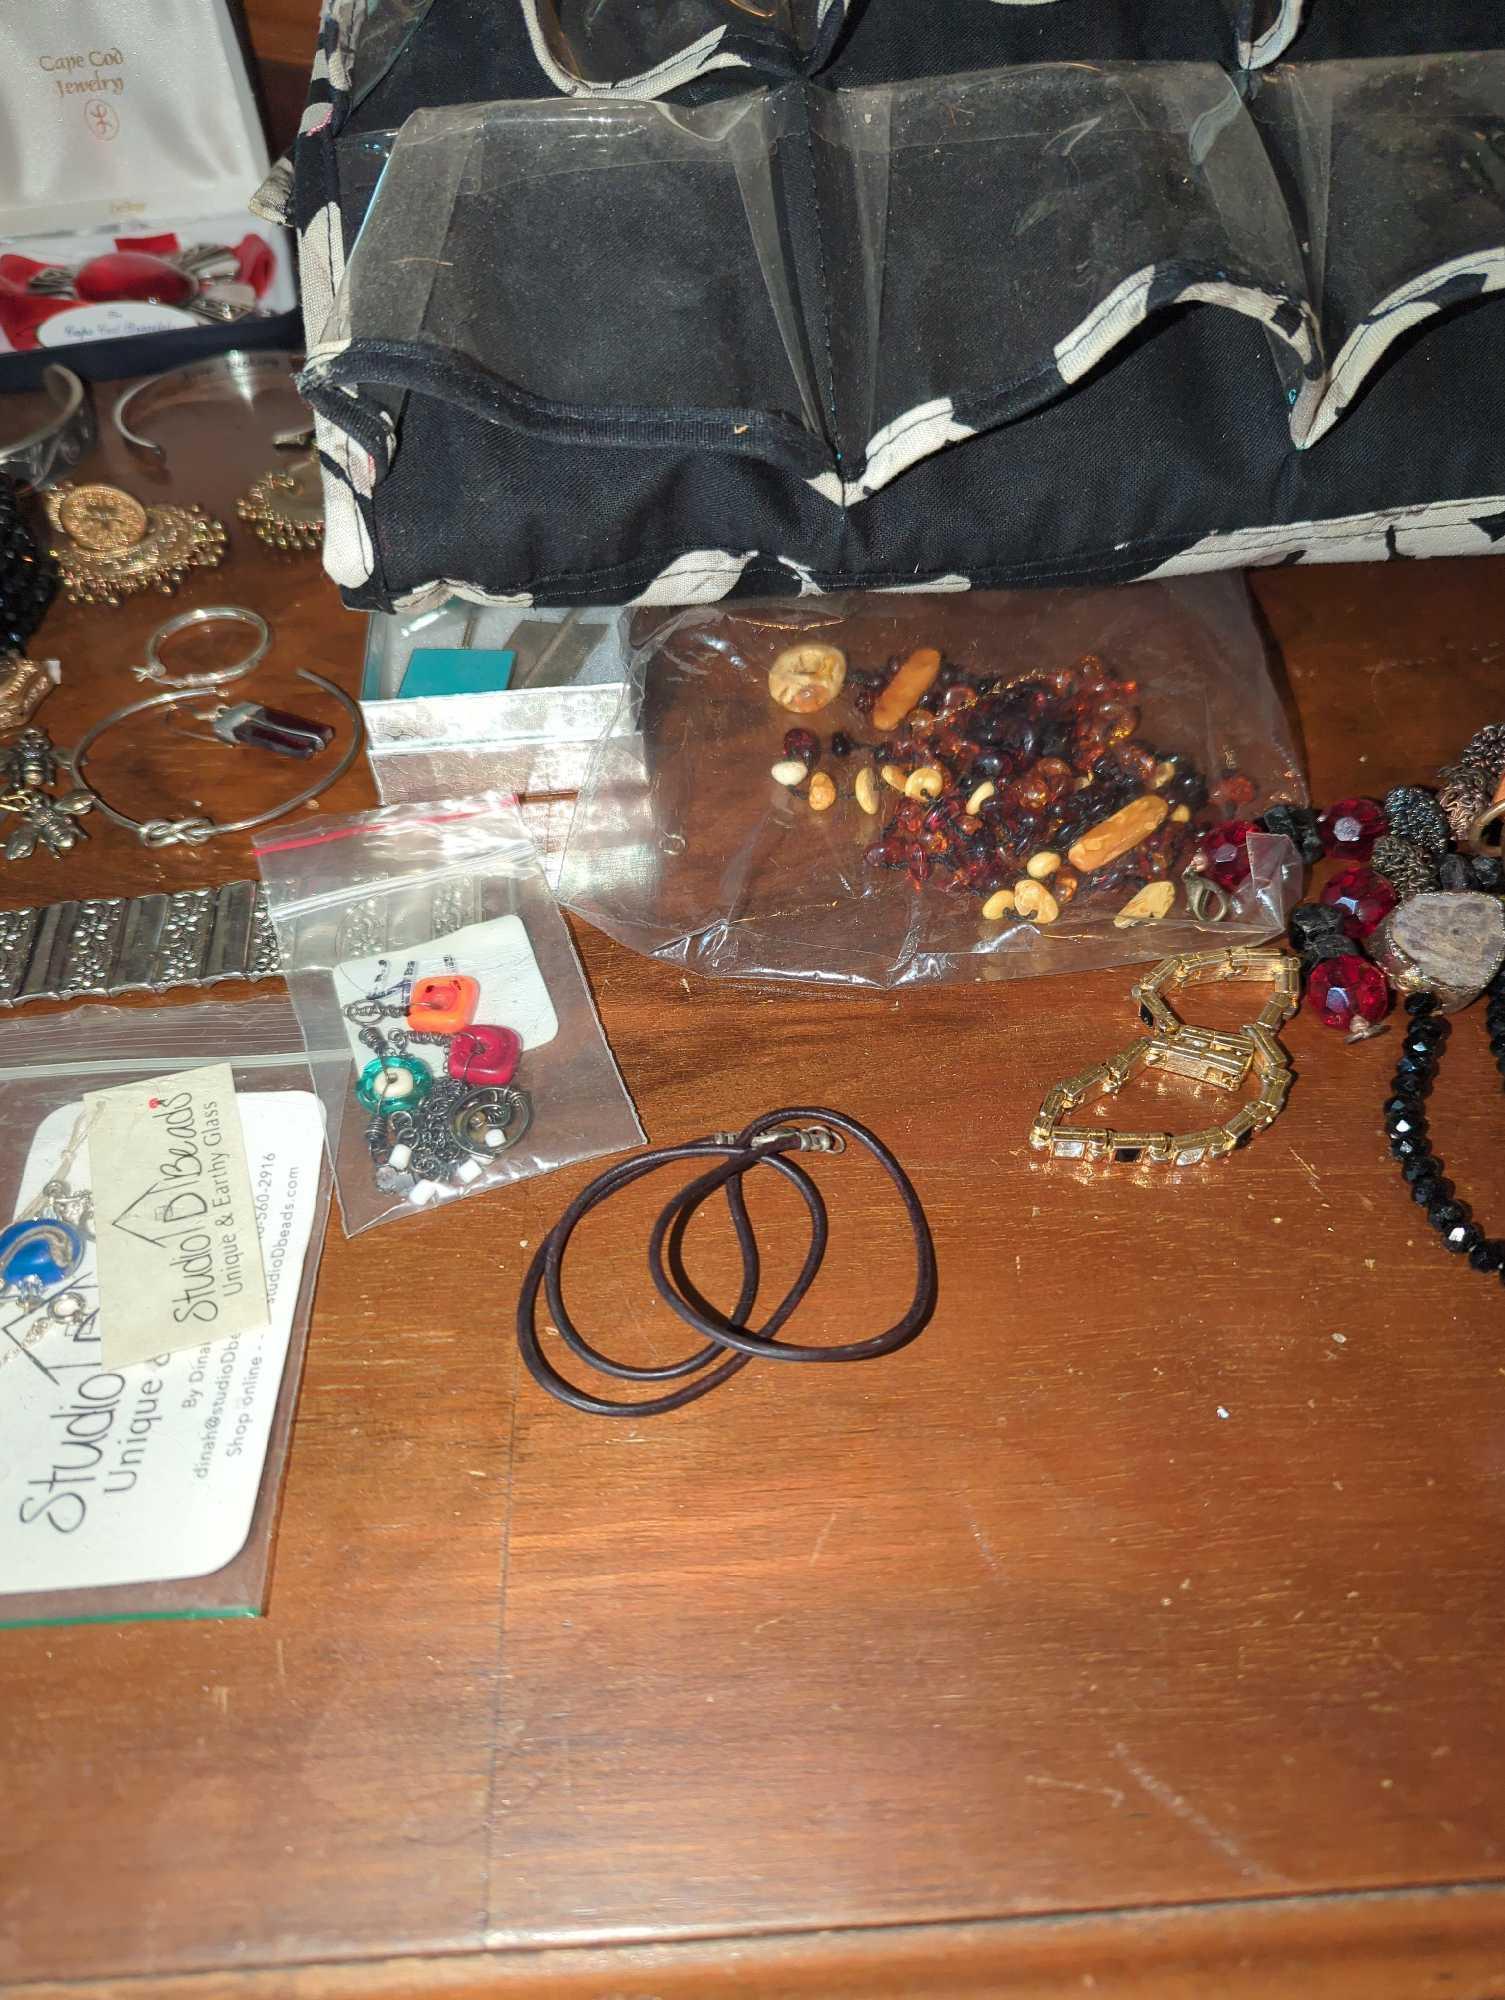 (BR1) JEWELRY LOT, CONTENTS OF THE TOP OF DRESSER, COSTUME JEWELRY, WATCHES, WATCH HOLDER, ETC.